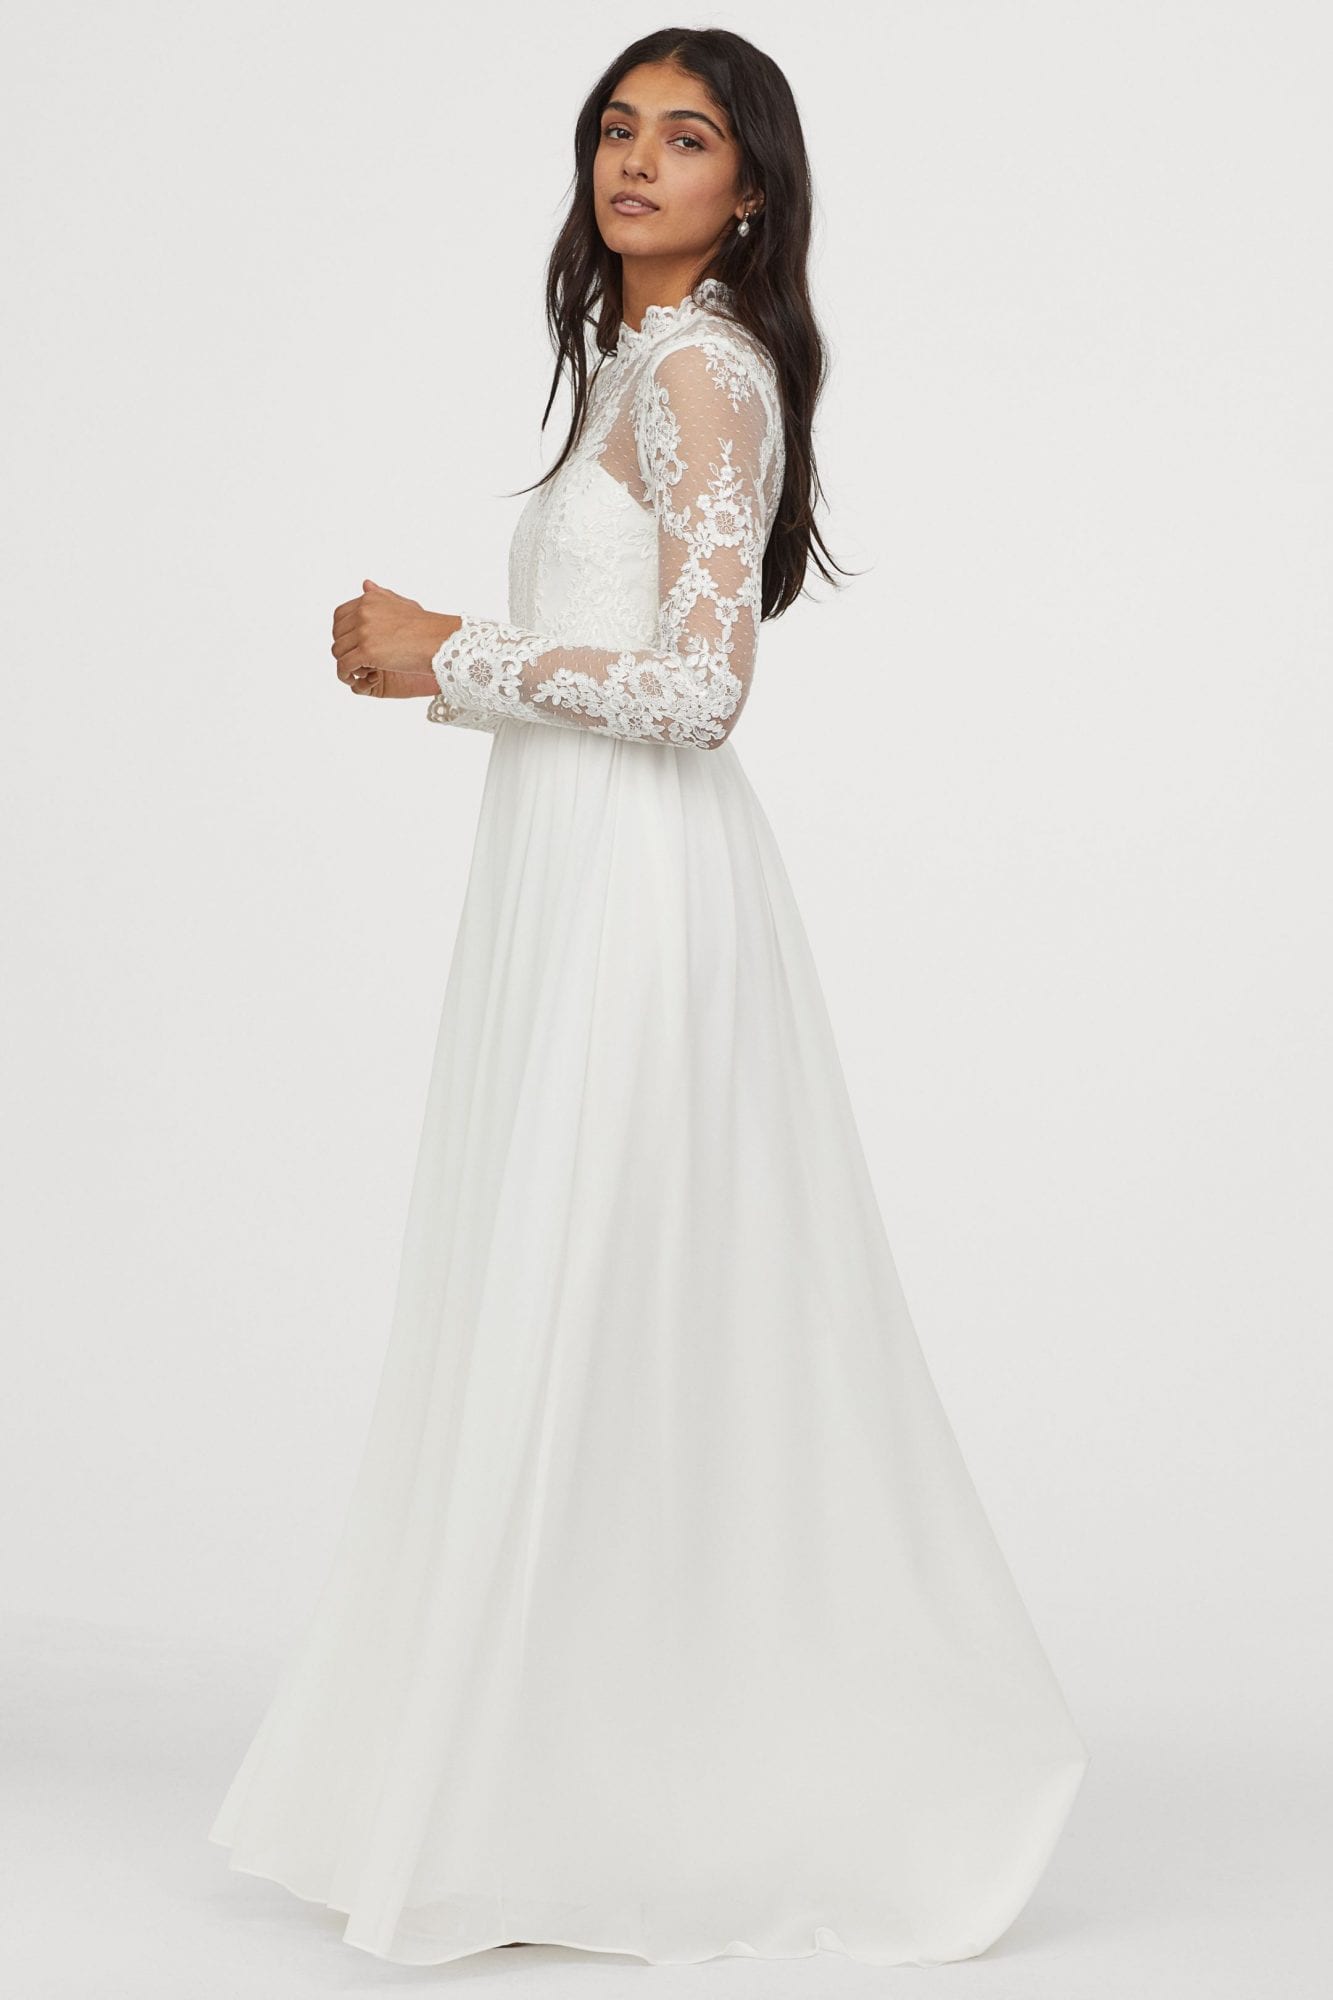 The Best Budget High Street Wedding Dresses | For Better For Worse